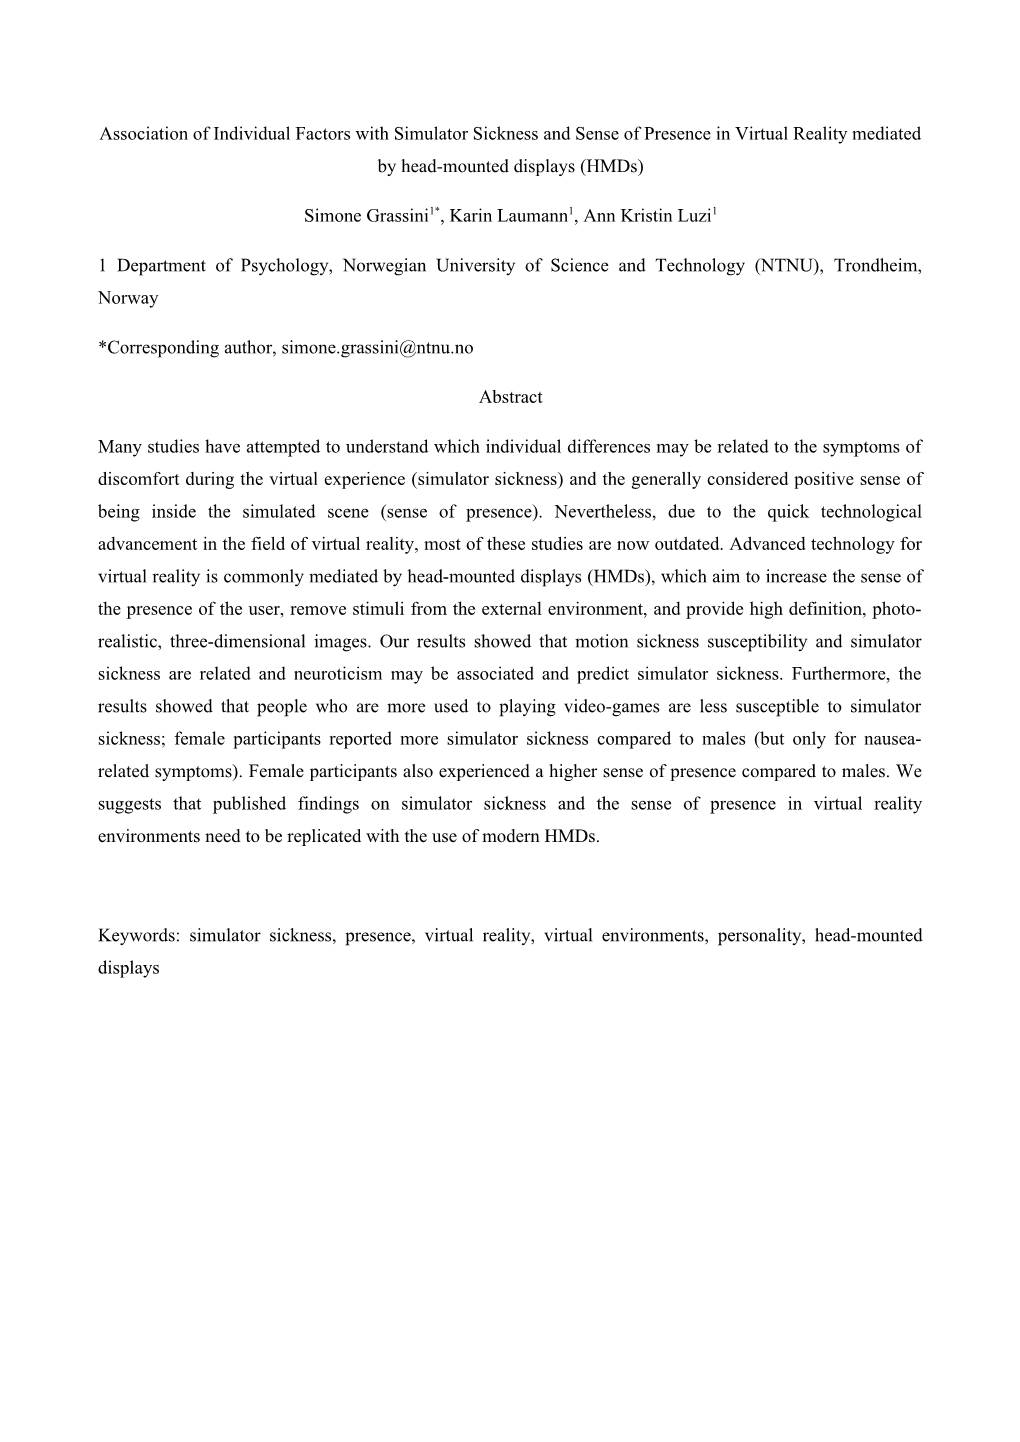 Association of Individual Factors with Simulator Sickness and Sense of Presence in Virtual Reality Mediated by Head-Mounted Displays (Hmds)